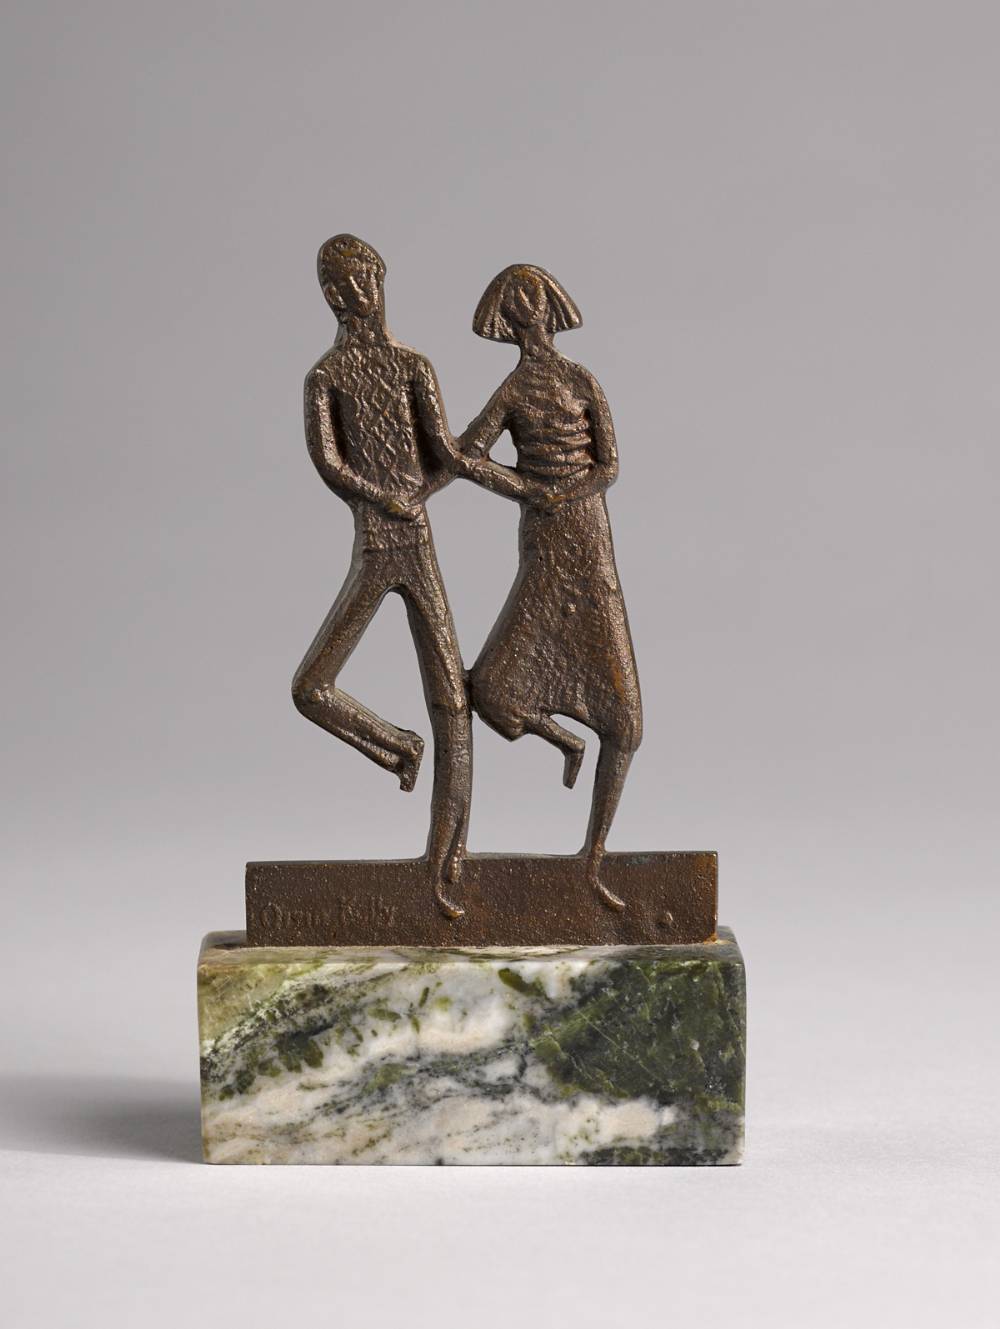 CIL DANCERS by Oisn Kelly sold for 640 at Whyte's Auctions